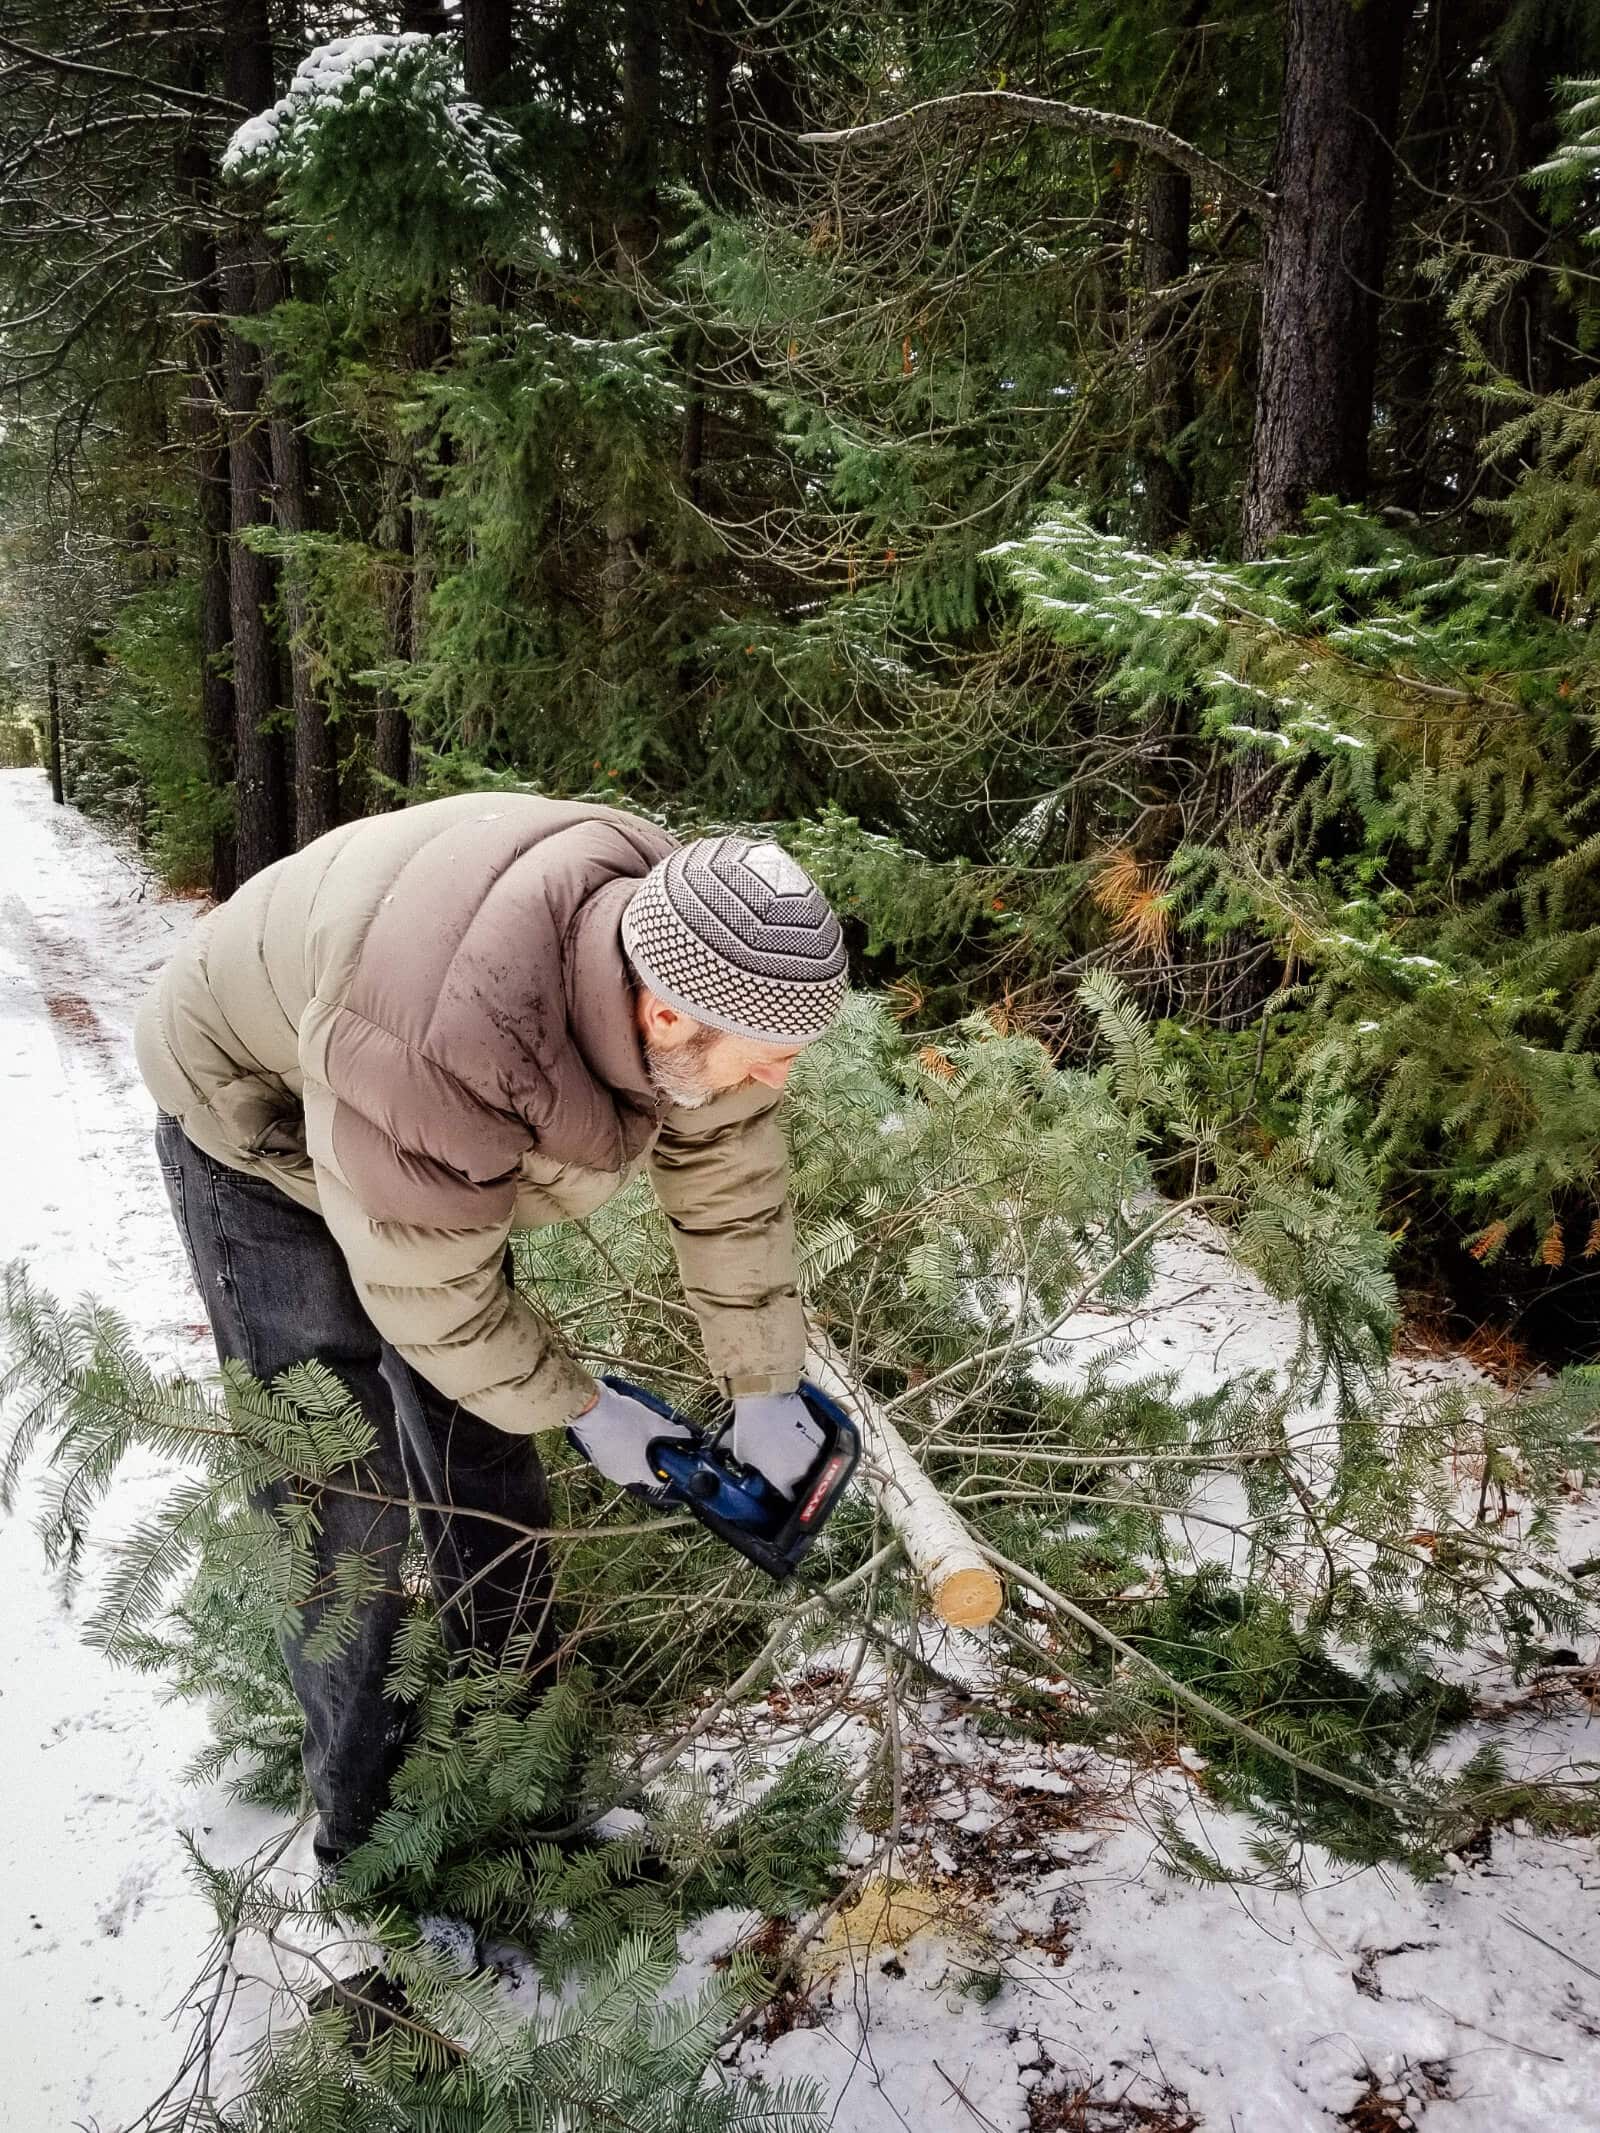 Cutting down our own Christmas tree